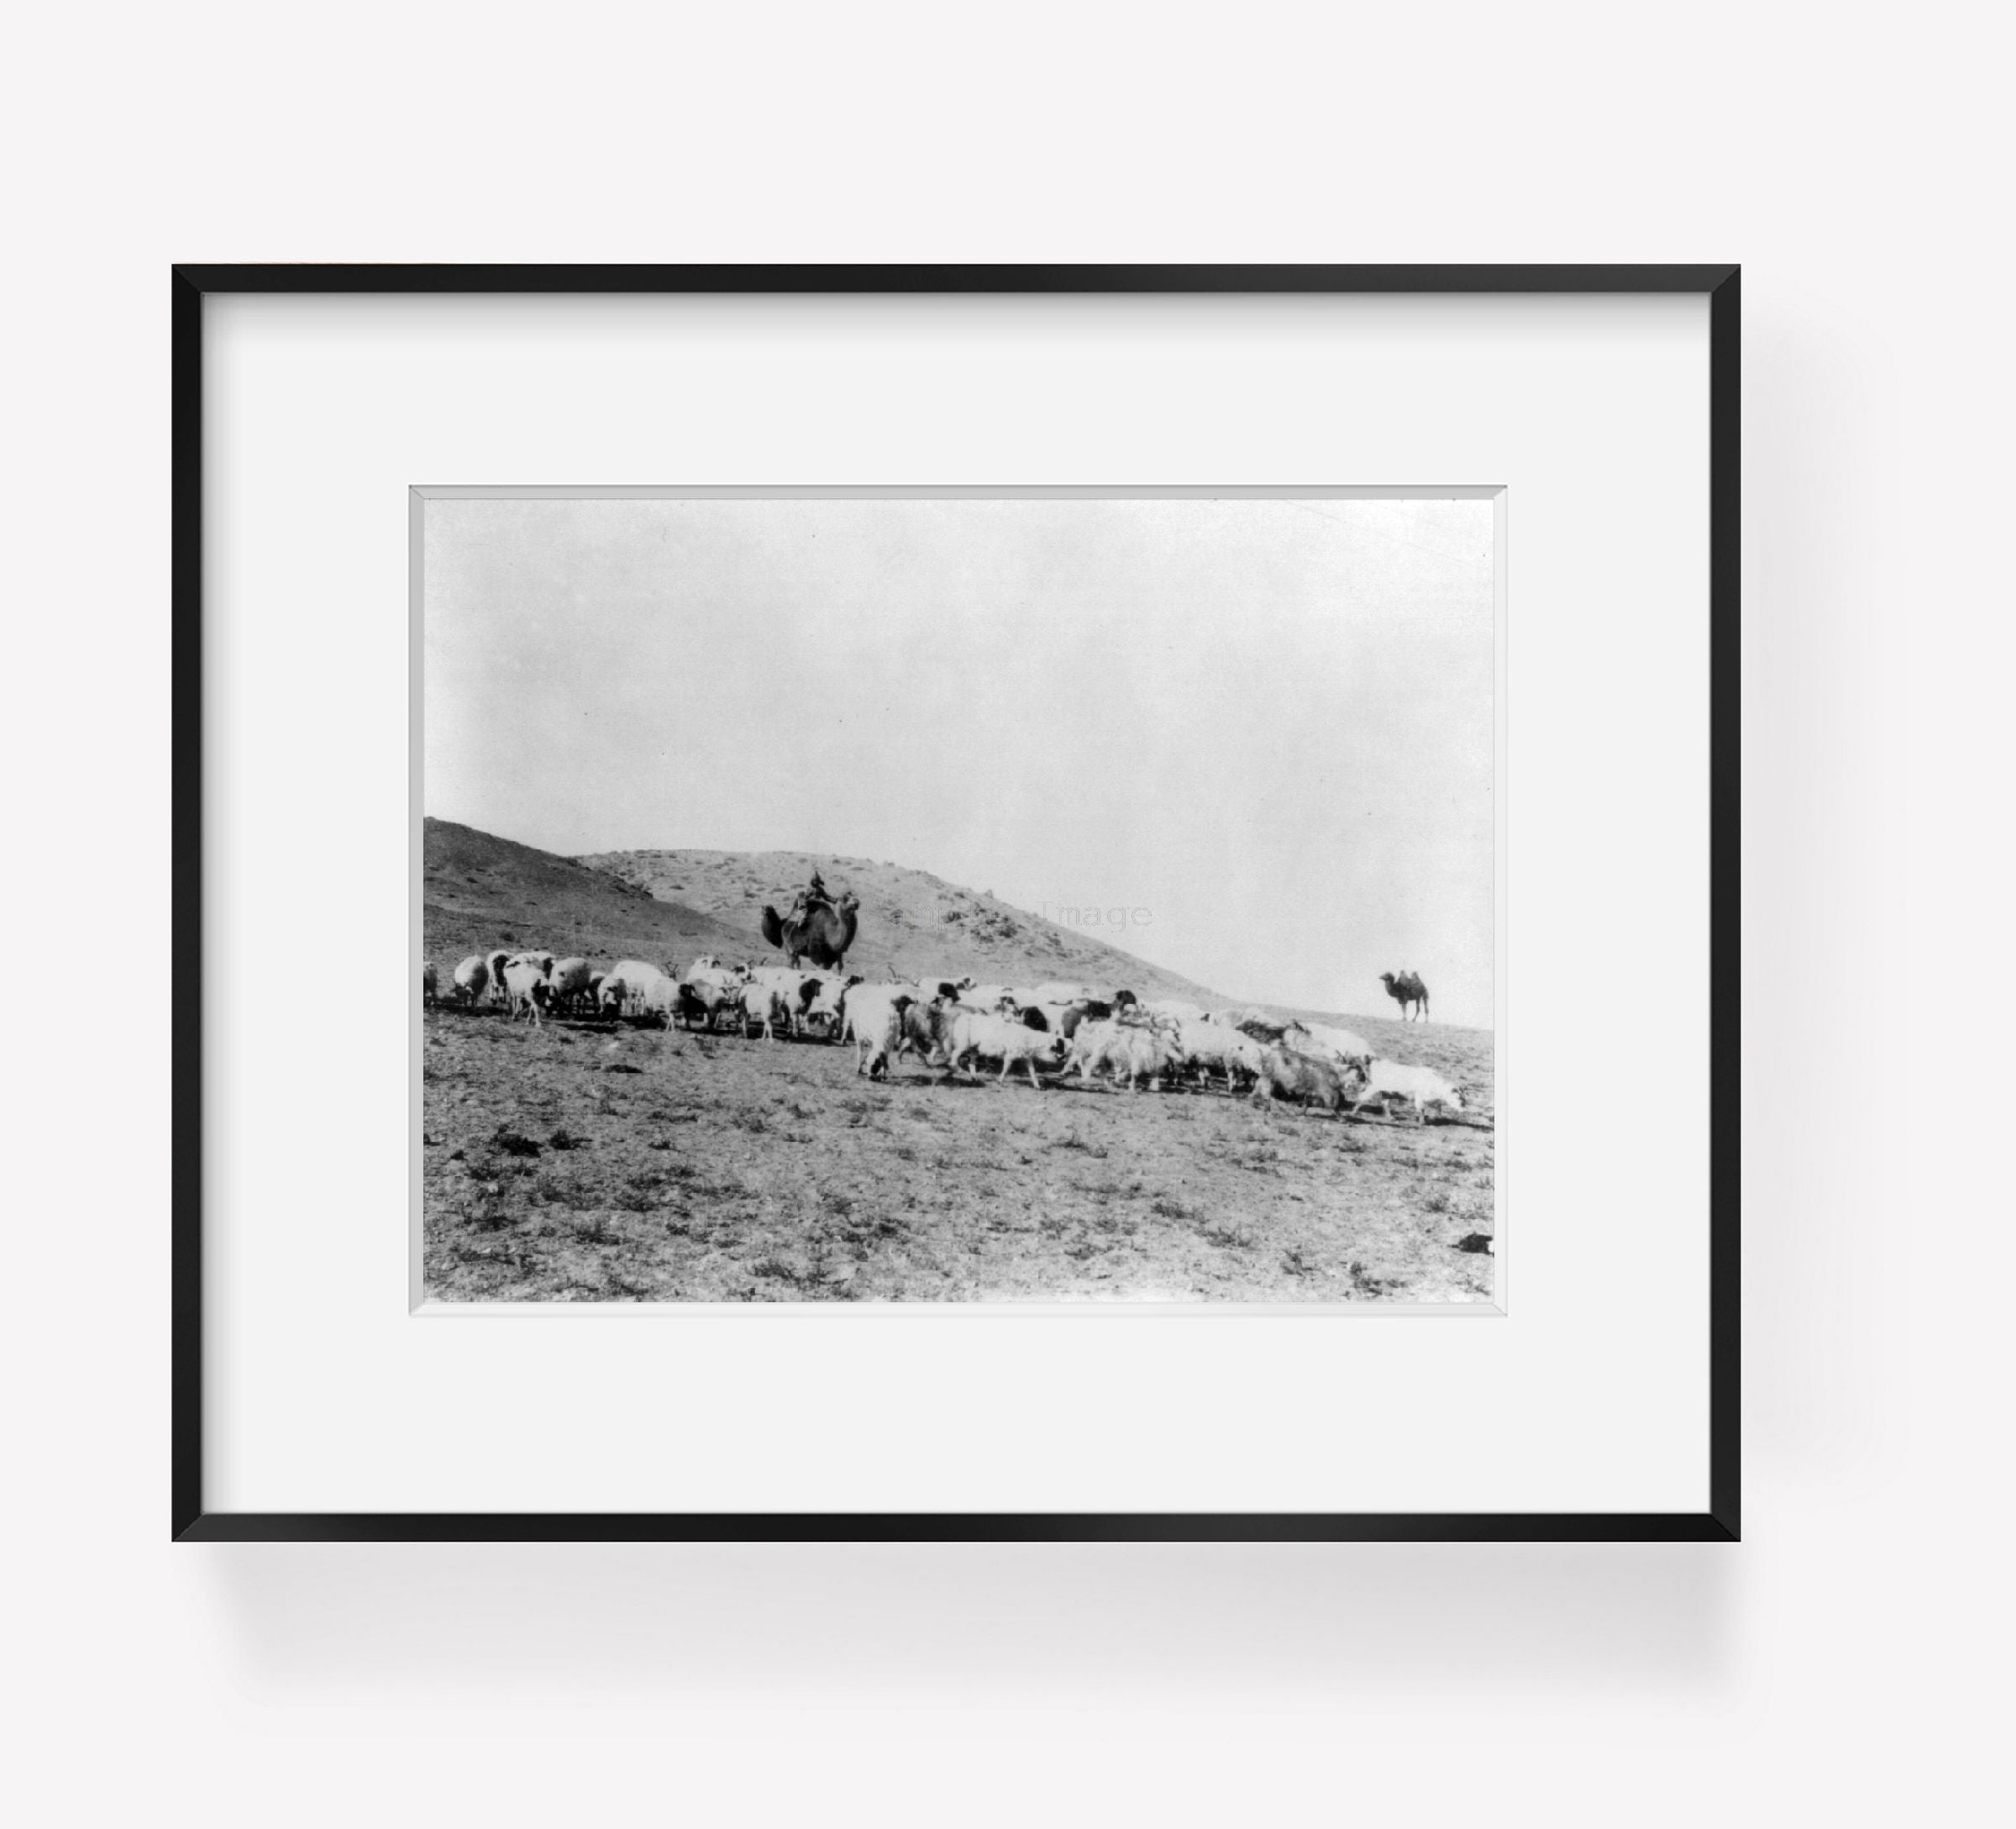 Photo: Mongolia. Shepherds on camels, watching over grazing sheep, 1920-1930, Asia